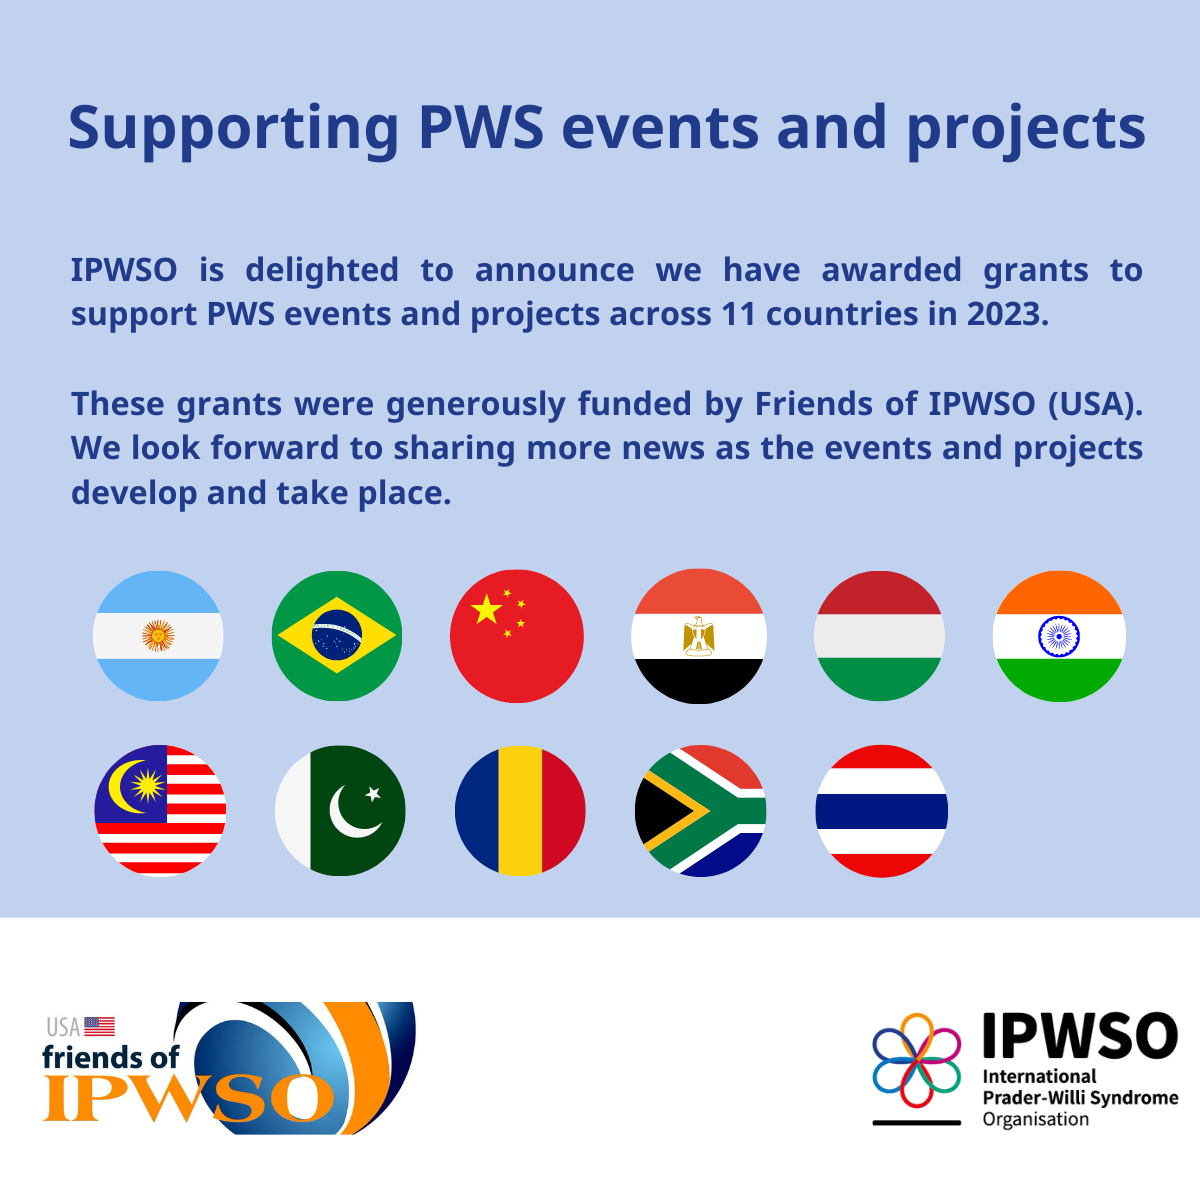 IPWSO has awarded grants to people in 11 countries to organise events and projects.